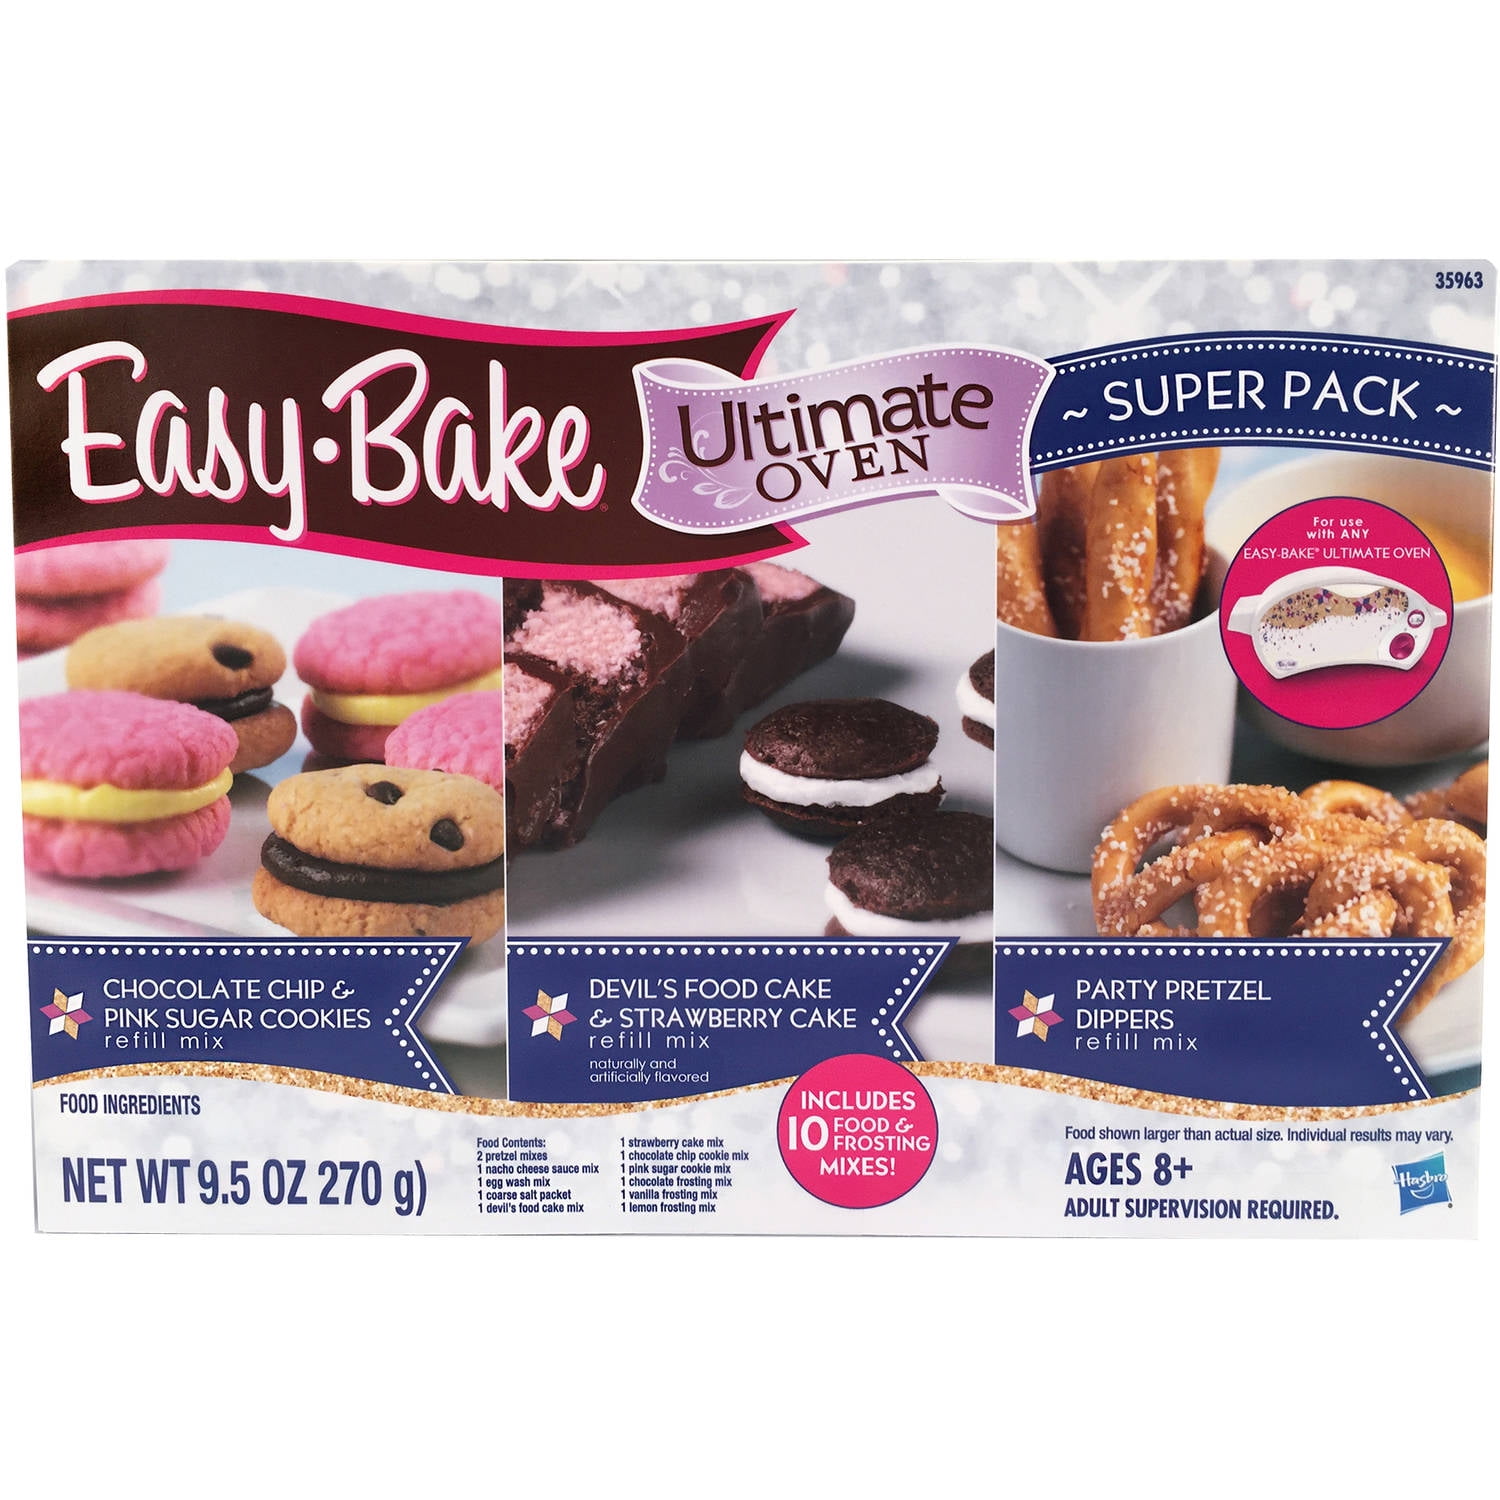 2x Easy-bake Ultimate Oven Party Pretzel Dippers Refill Mix 2 Hasbro for sale online 